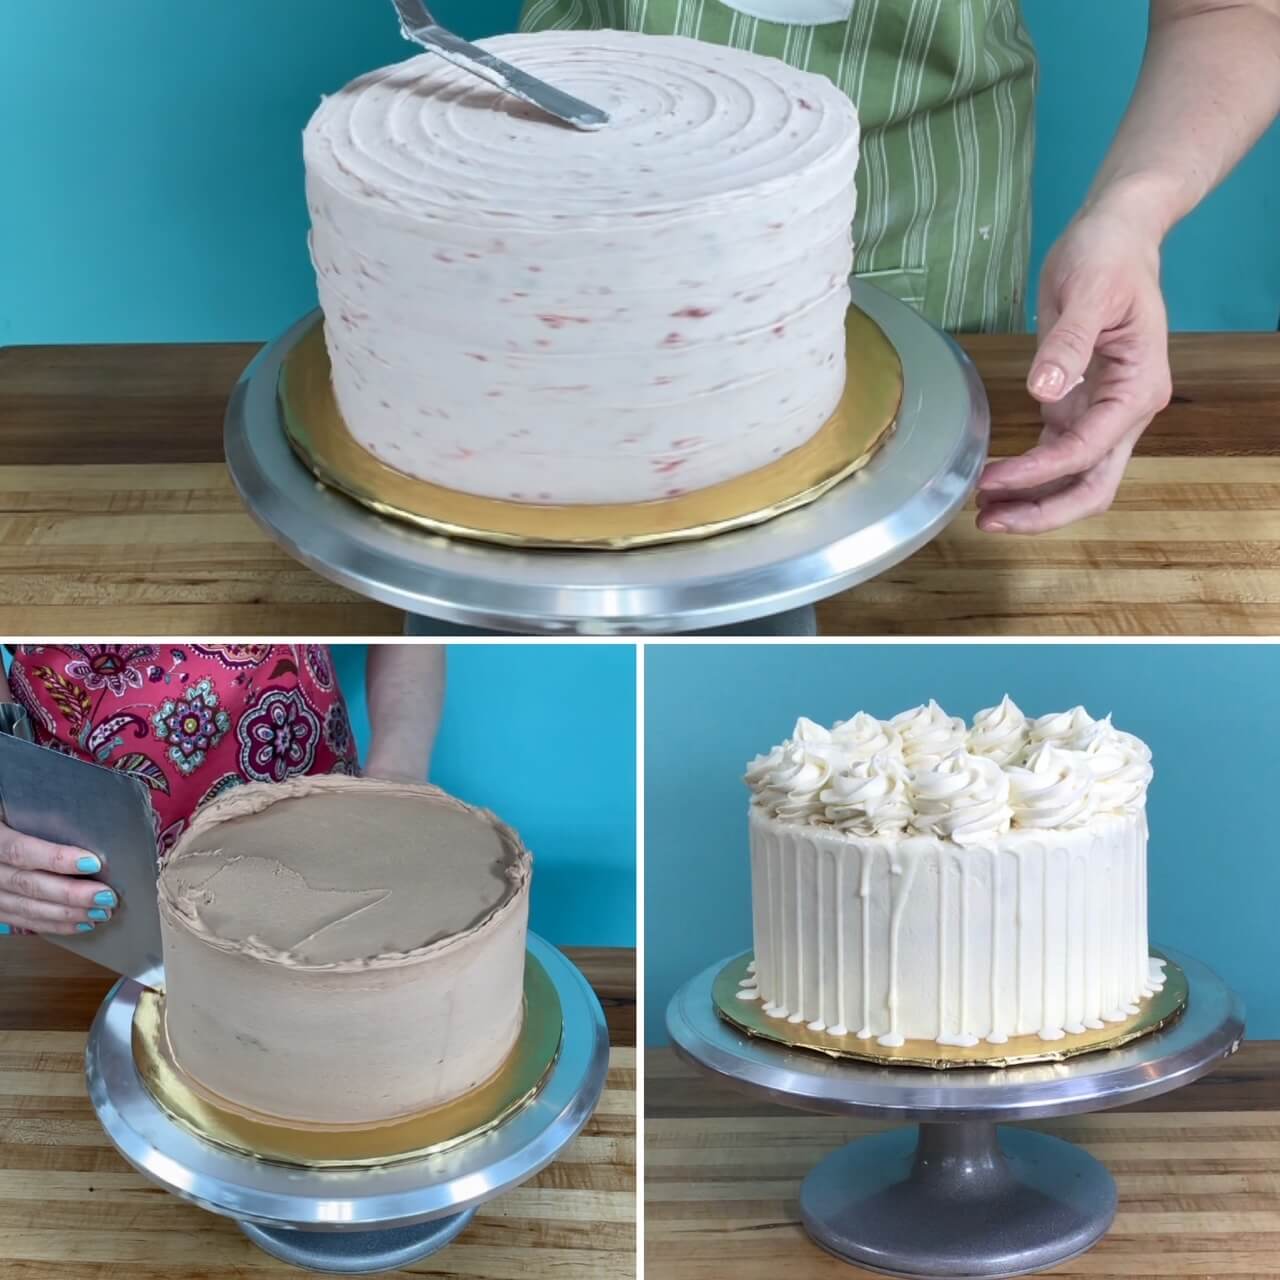 How to Bake and Layer Cakes Like a Pro: 5 Easy Steps - Amycakes Bakes